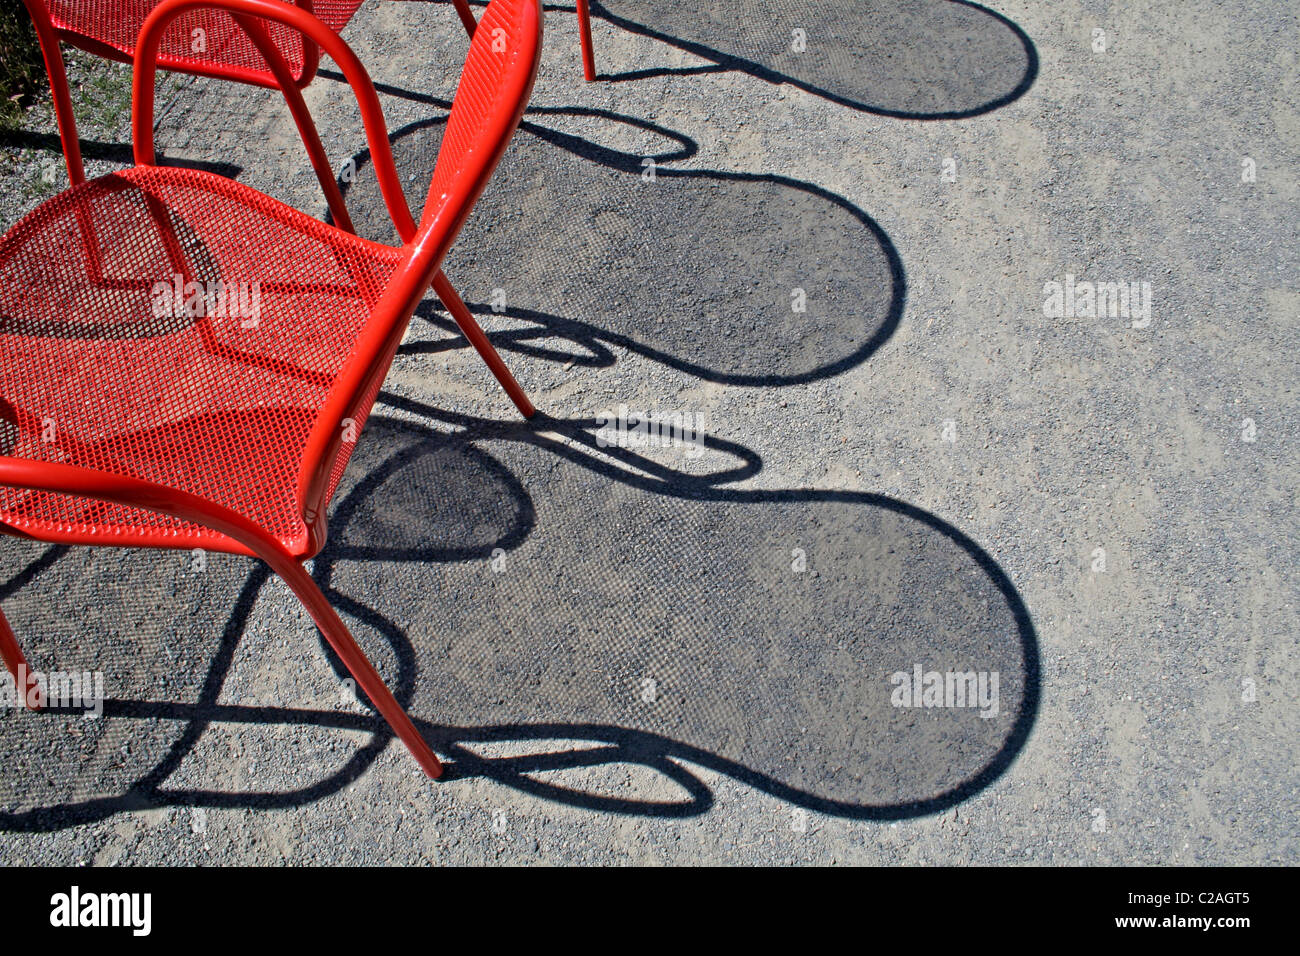 Red wire chairs shadows on concrete Stock Photo